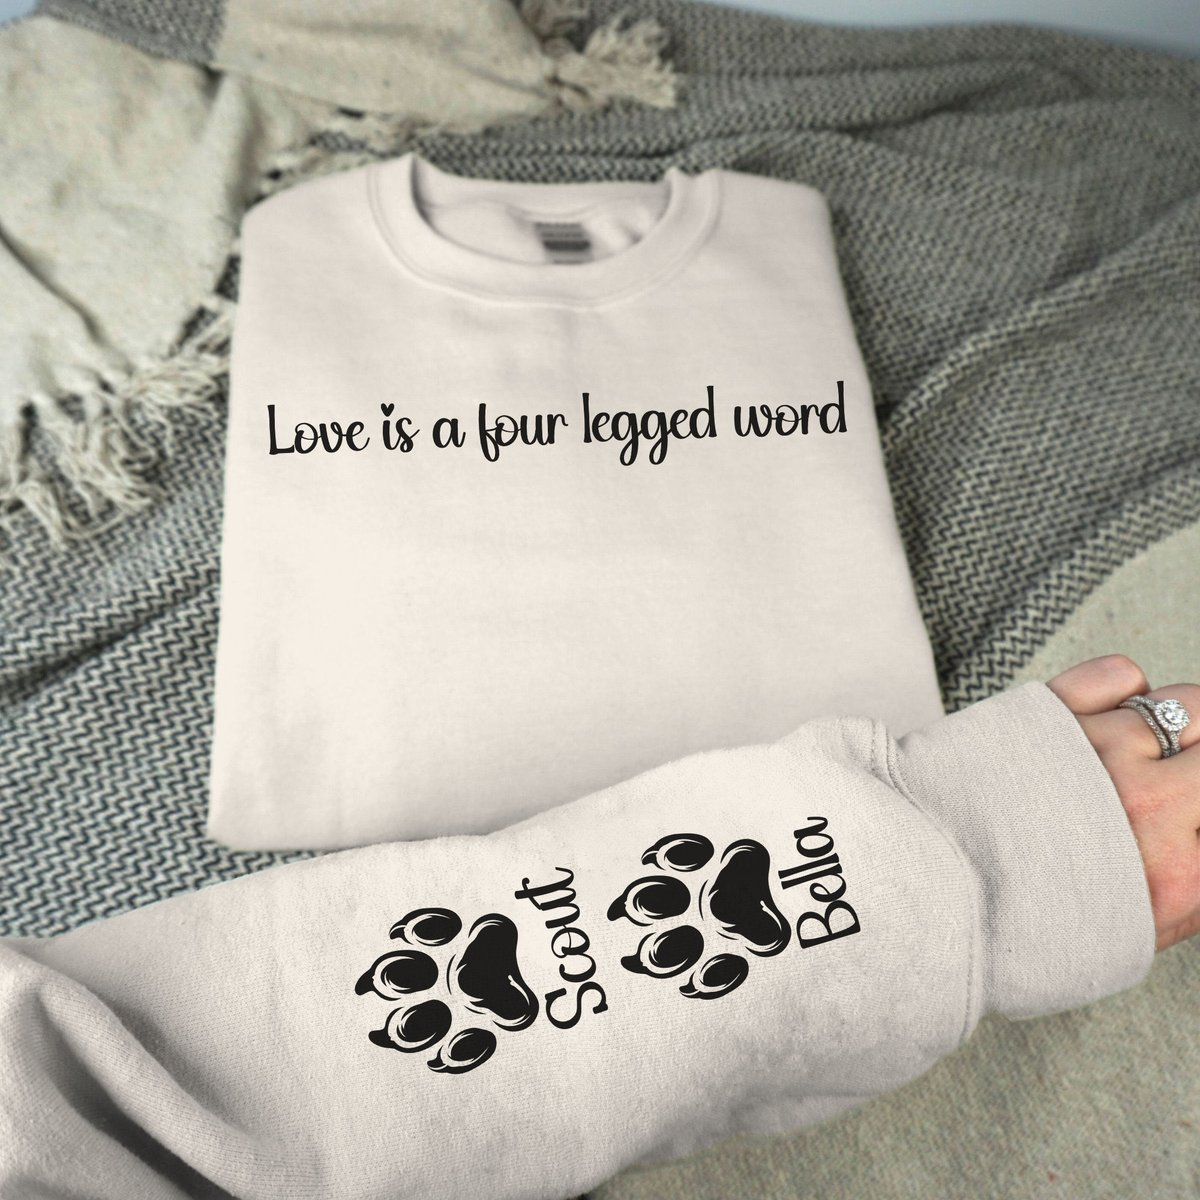 Check out this cute custom sweatshirt! Makes a great gift for any dog owner fancifulcreationsco.etsy.com/listing/159597… #dogmom #petgifts #customsweatshirts